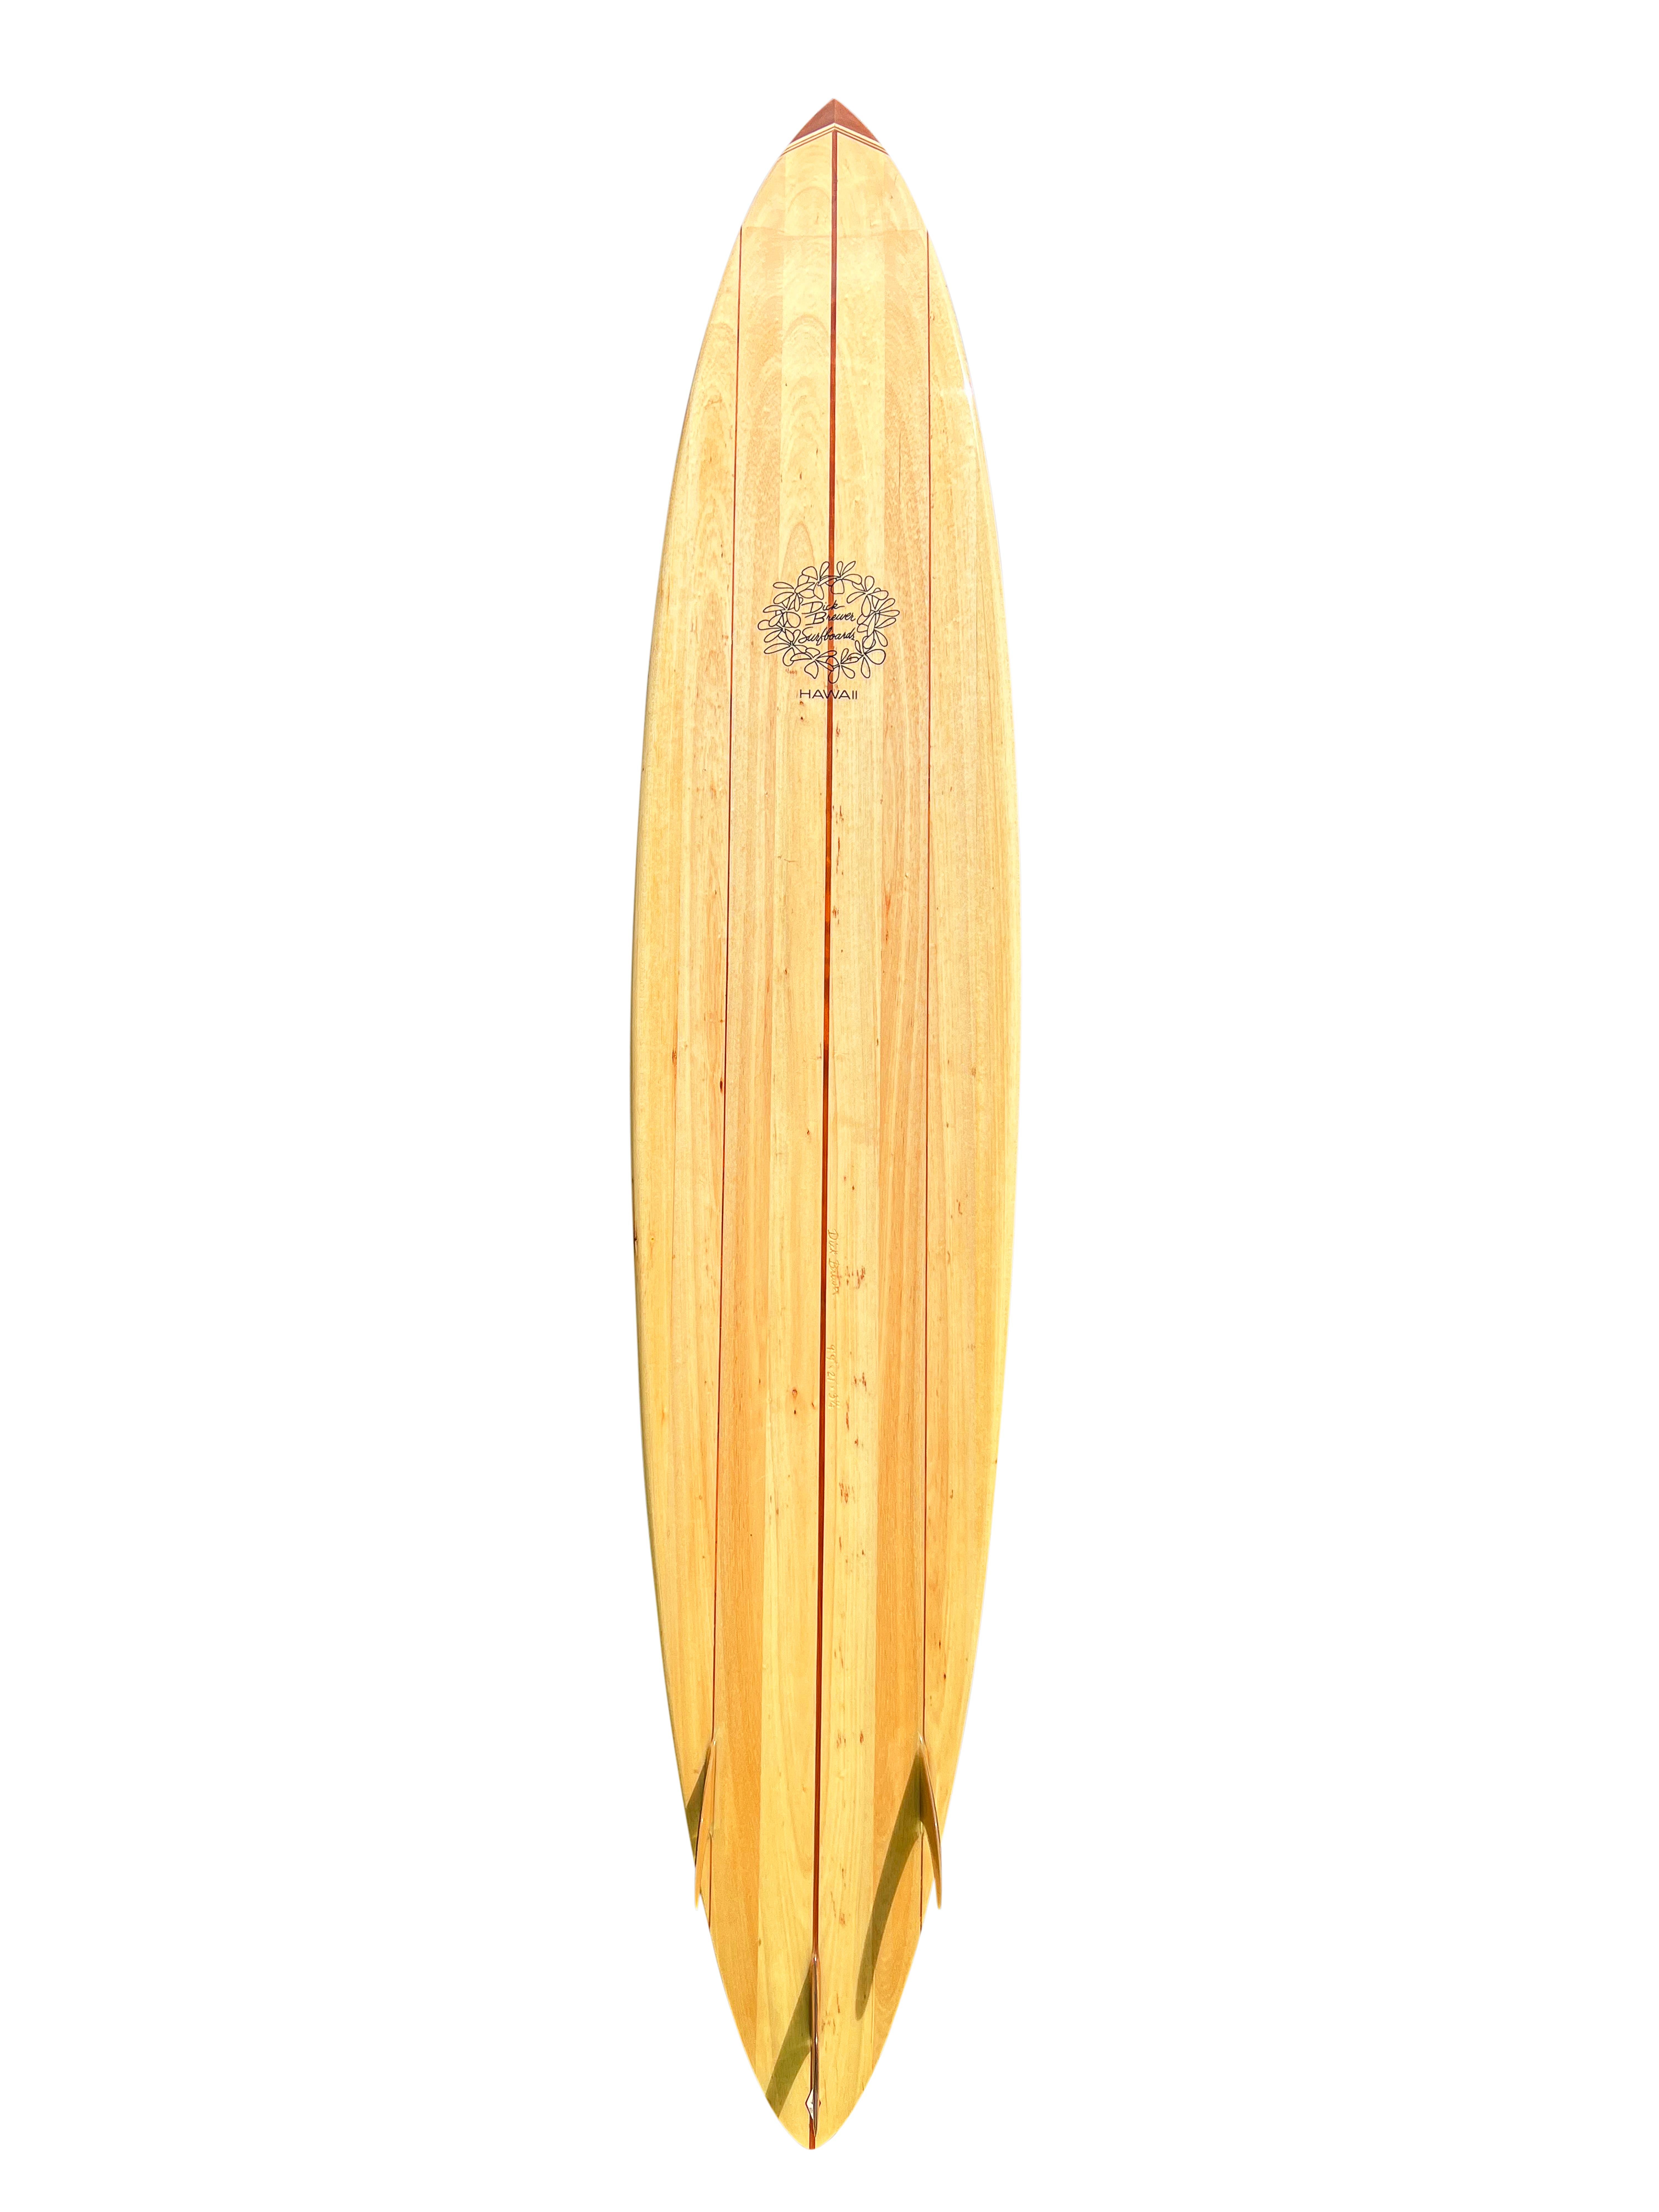 Big wave balsawood pintail surfboard shaped by the late Dick Brewer (1936-2022) in the early 2000s.  Features tri-stringer design with beautiful Hawaiian koa wood fins and 10 piece wood nose block. A remarkable example of a balsa surfboard shaped in